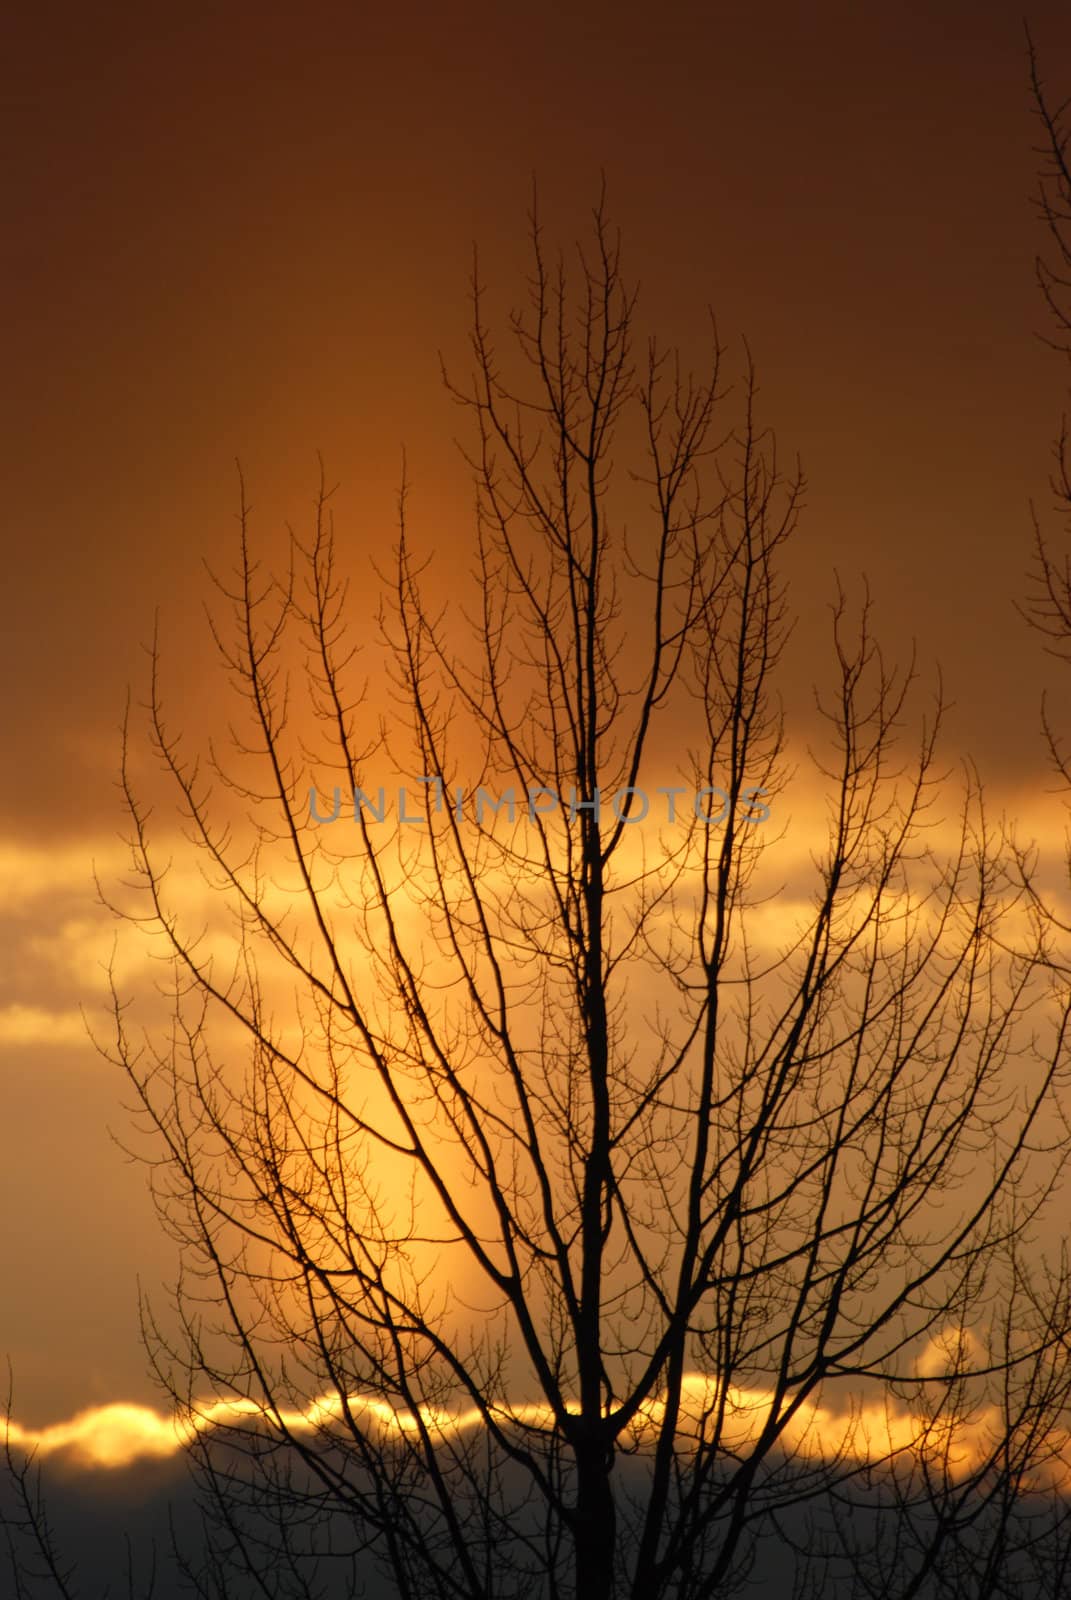 The sun rises from behind the clouds and the tree early morning